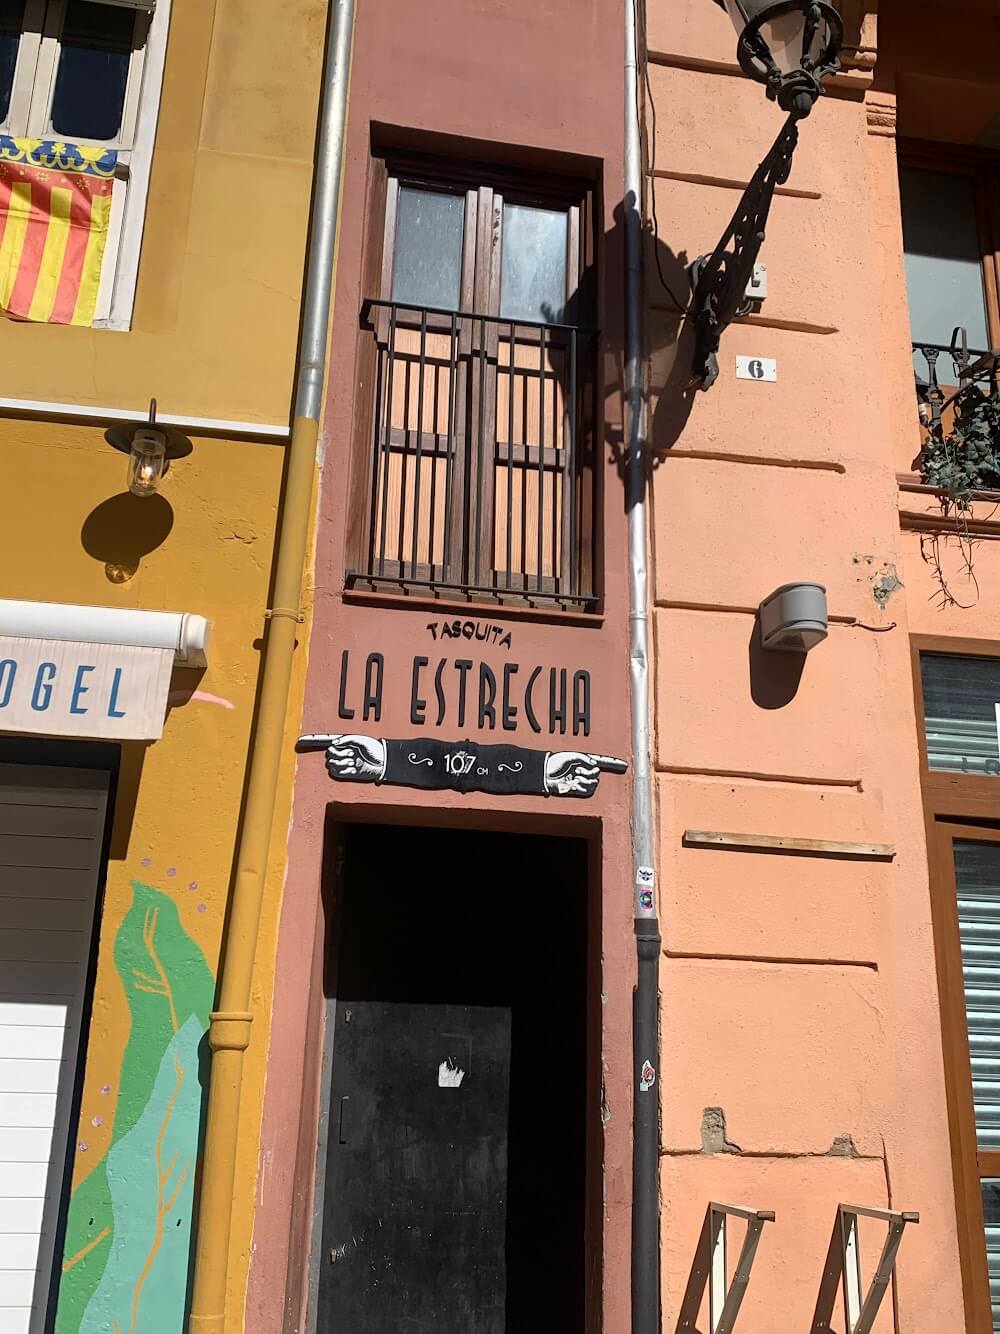 A very narrow pink house with a sign that says "La Estrecha"